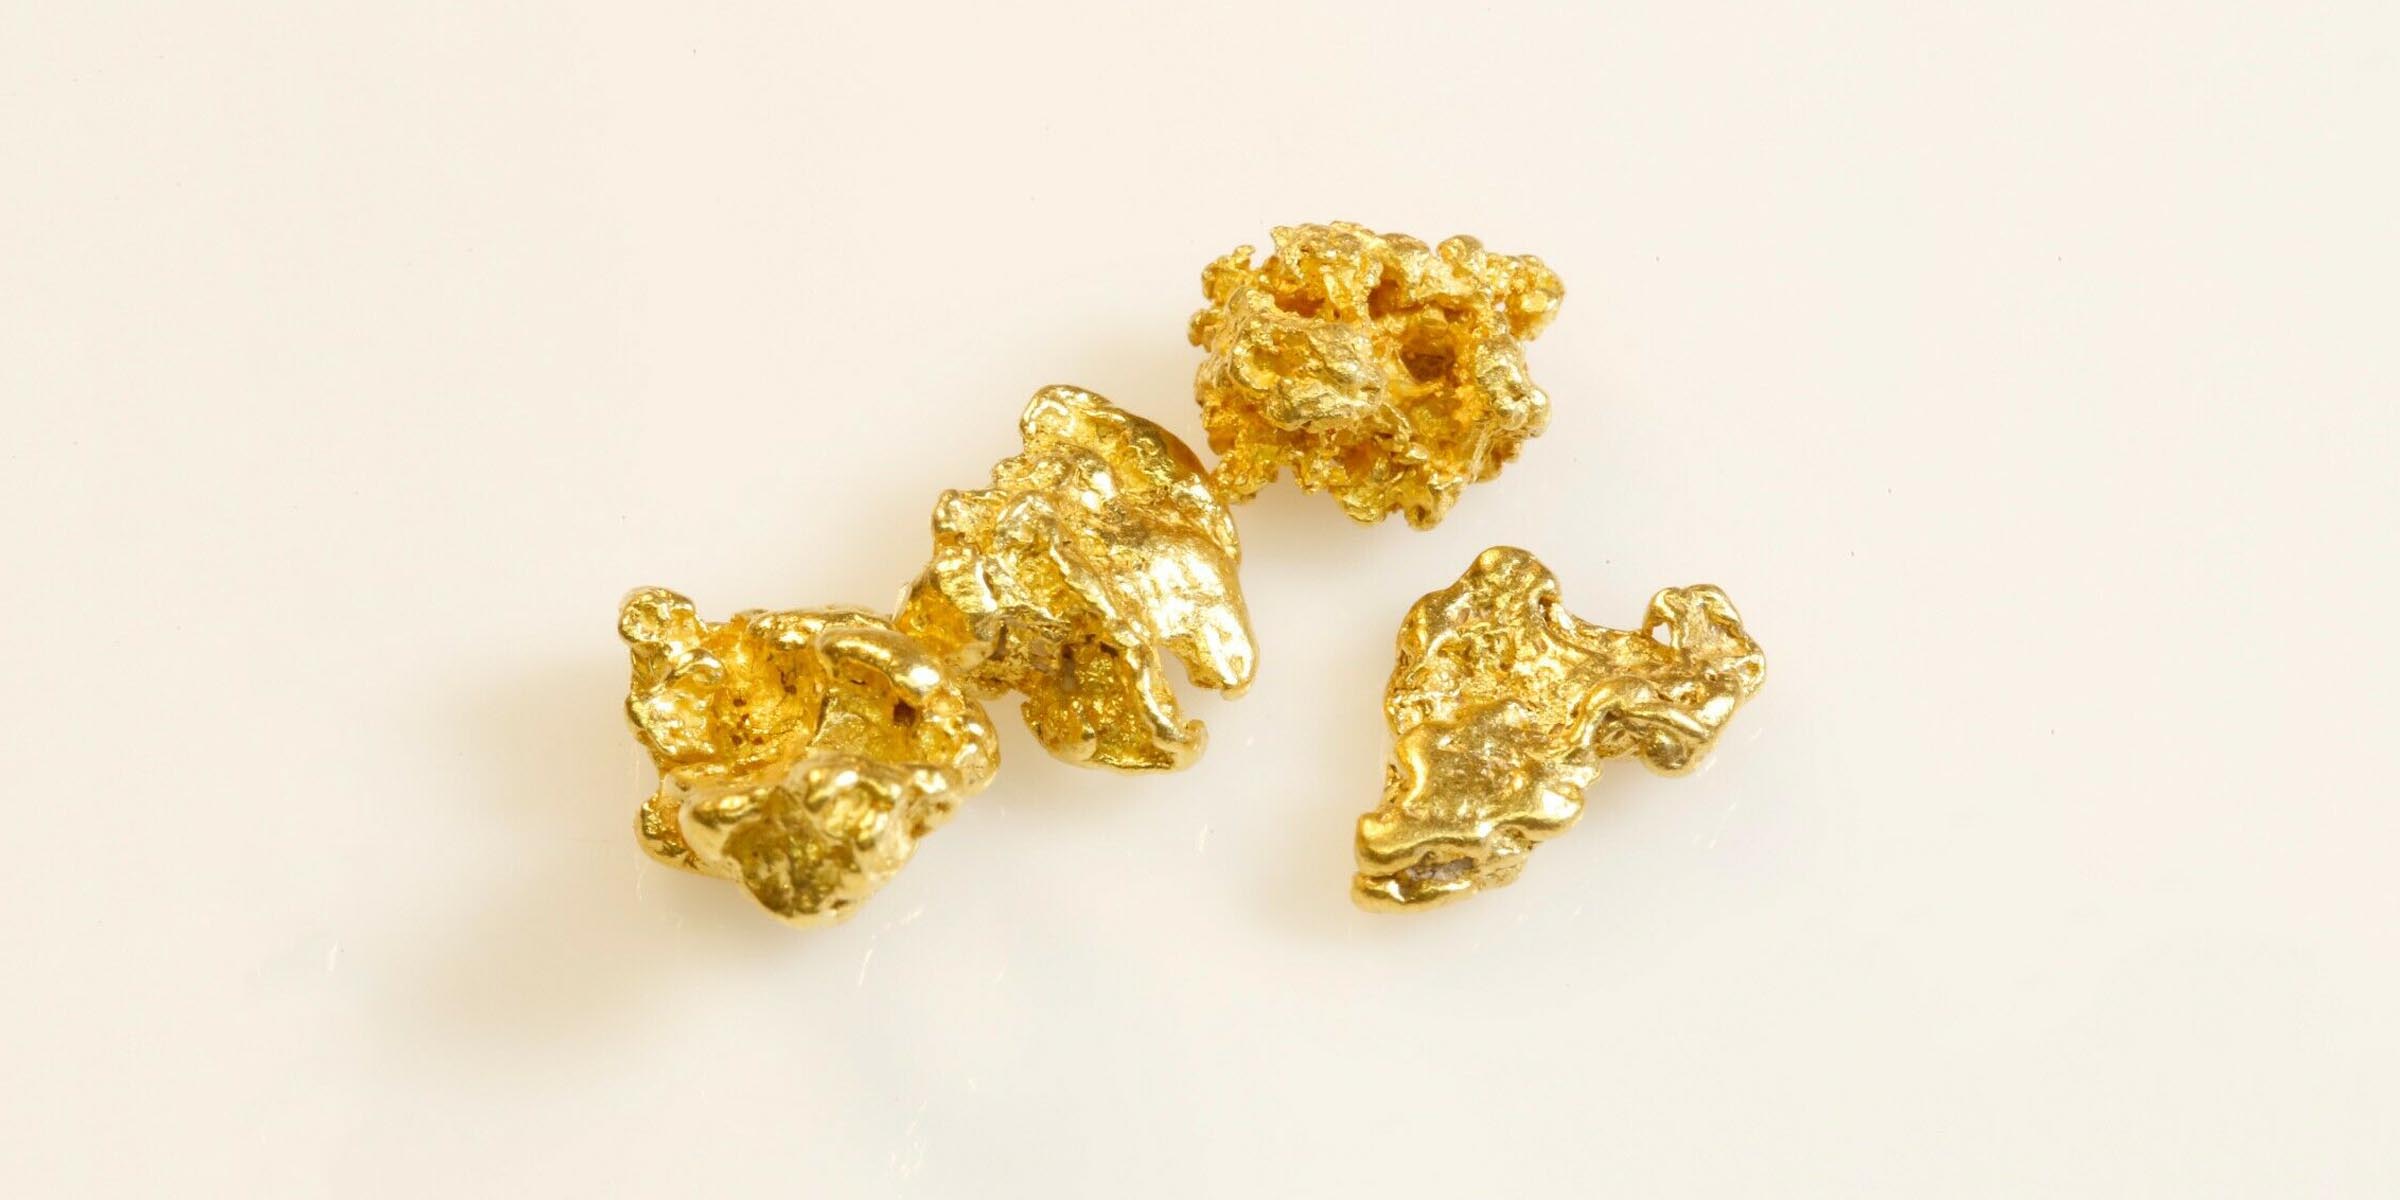 Karats and Gold Purity